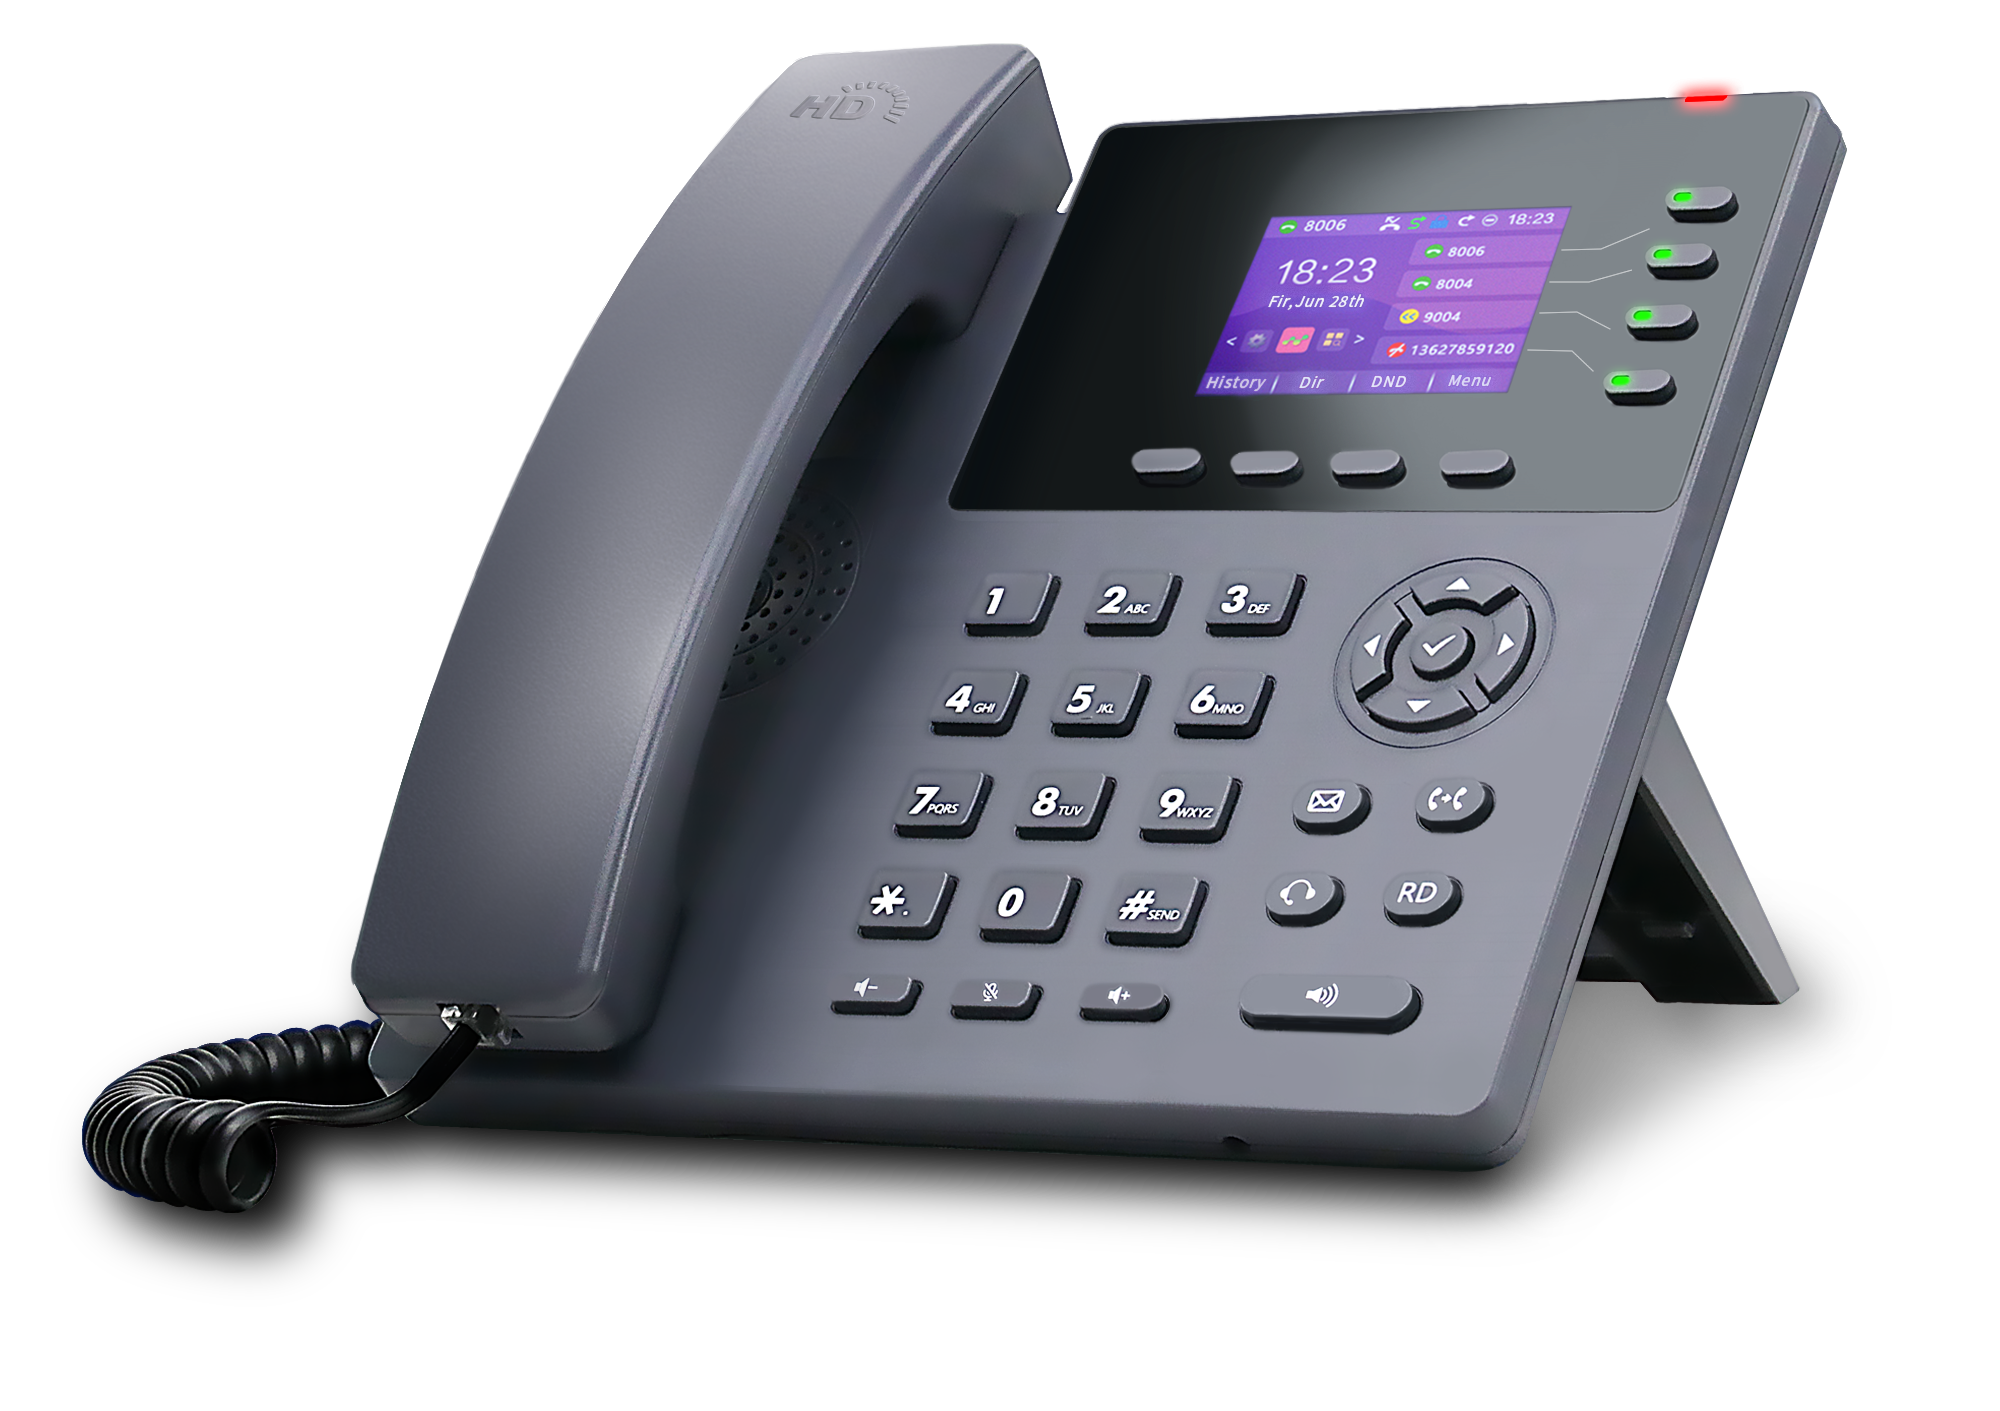 IP Phone SIP-T790N communication is secure and private